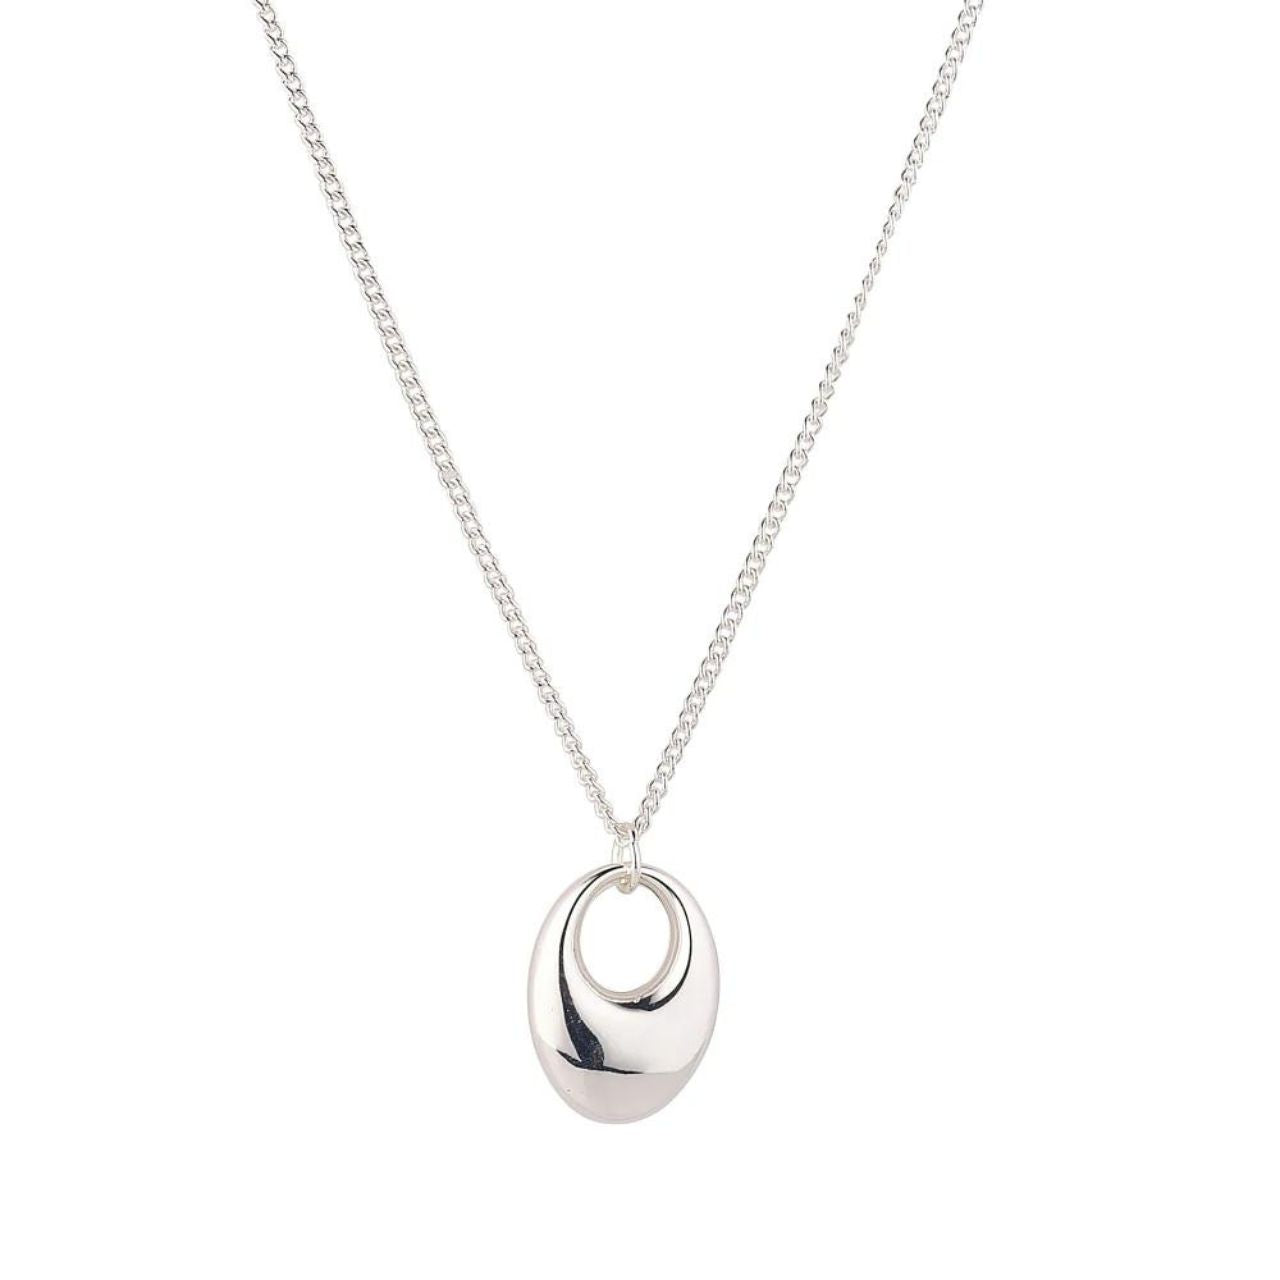 Zoe Long Silver Plated Necklace by Knight & Day  Knight & Day has crafted the perfect piece with their Zoe Long Silver Plated Necklace. Features include a high-quality silver plating that is designed to last and retain its shine. An eye-catching and classic design, it's sure to make a statement.